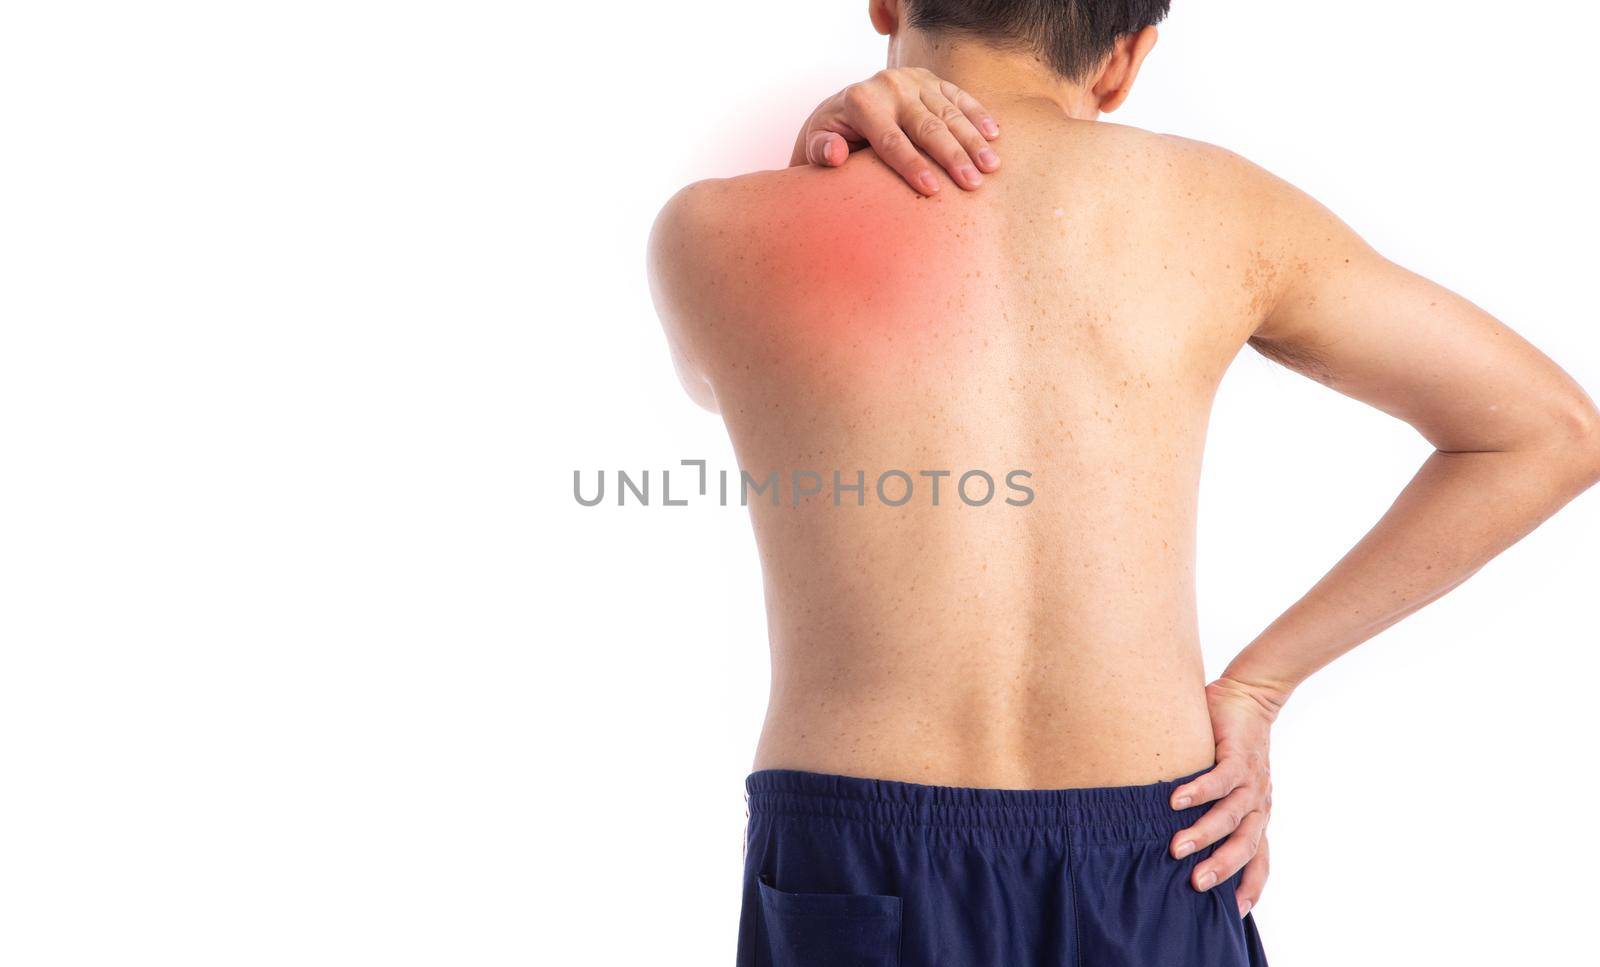 Sore pain of shoulder. Sprain and arthritis symptoms. middle age man holding his hurt shoulder over white background.